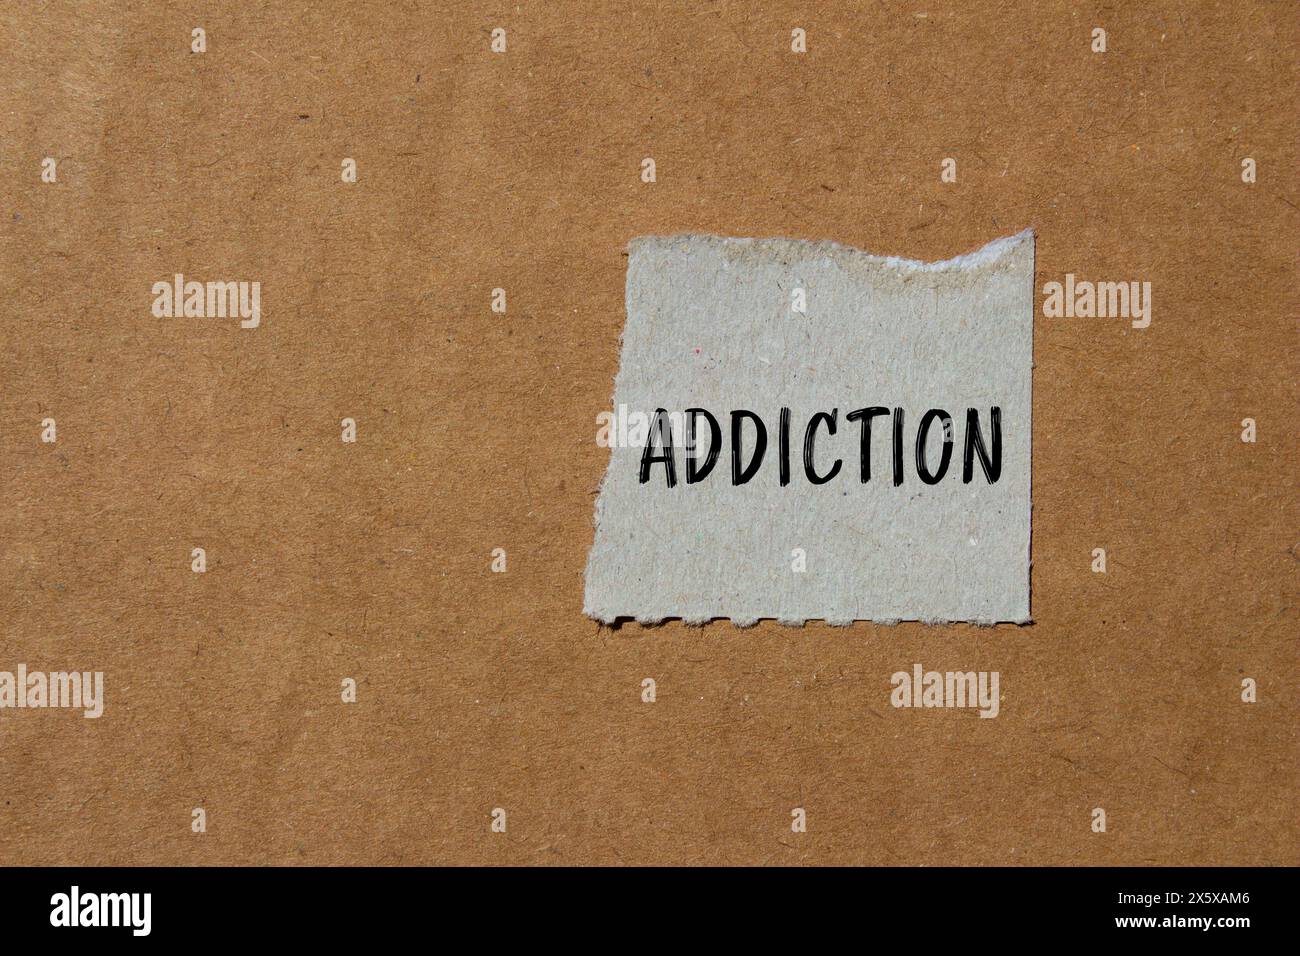 Addiction word written on ripped paper with brown background. Conceptual addiction symbol. Copy space. Stock Photo